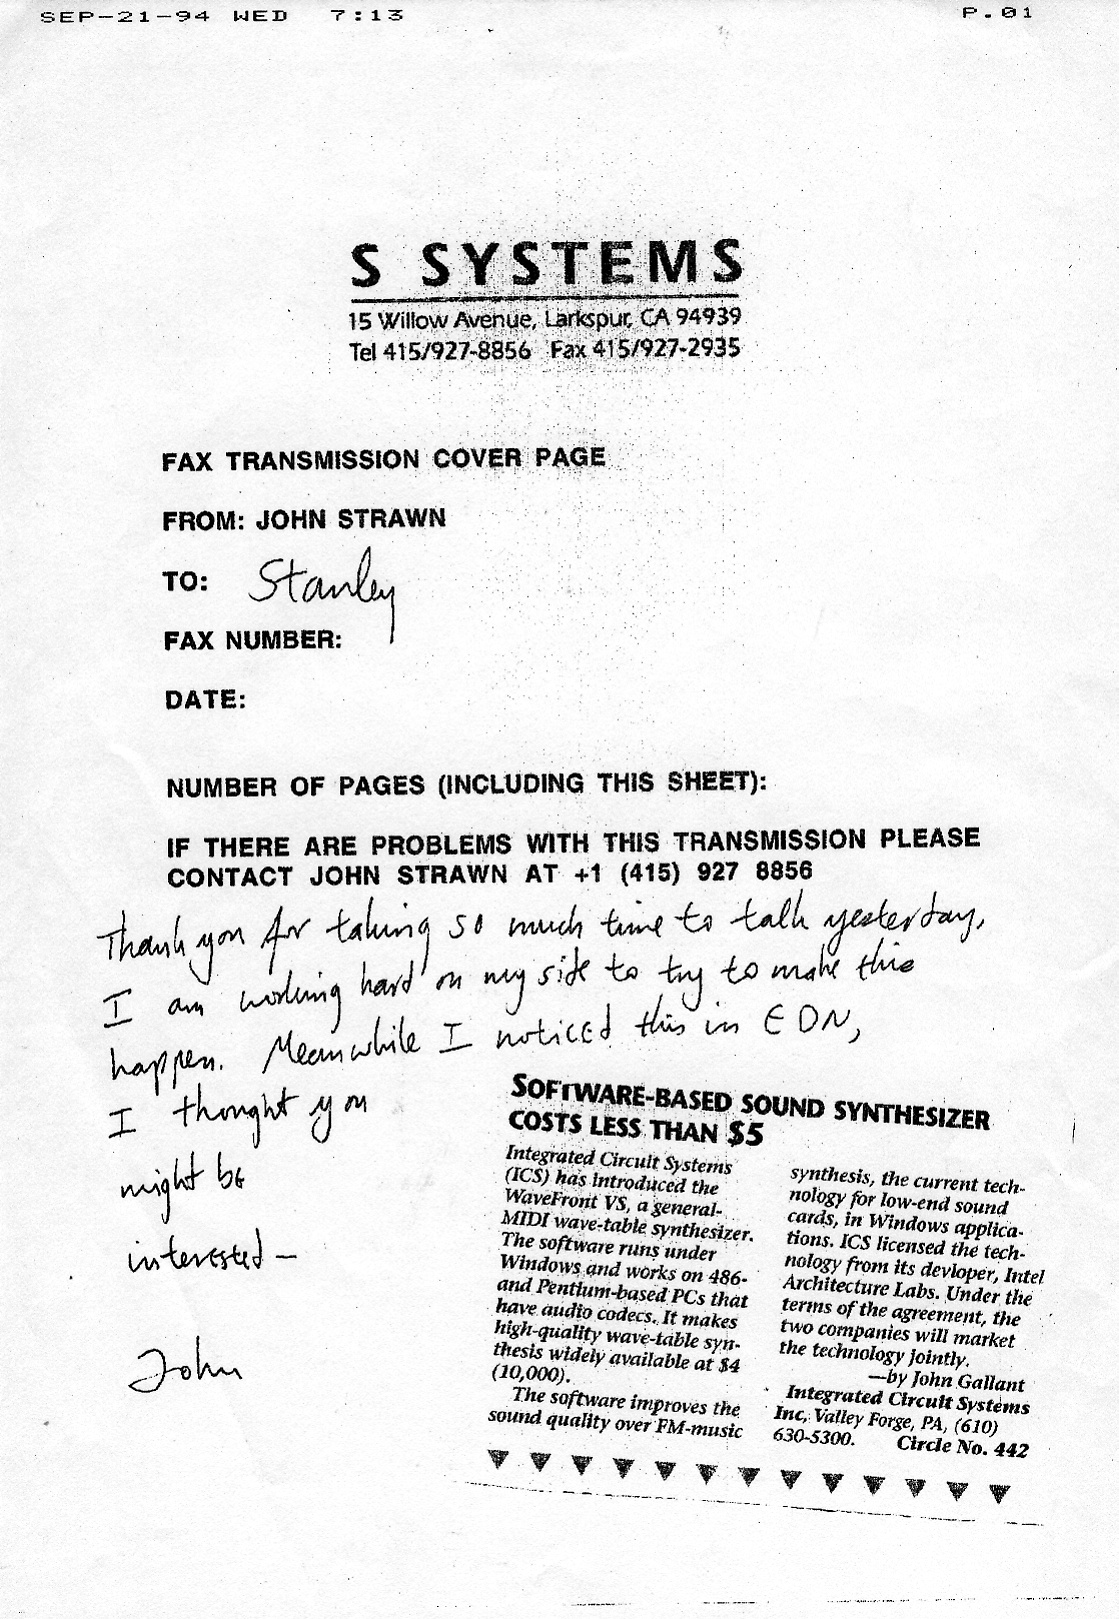 940921 S SYSTEMS FAX